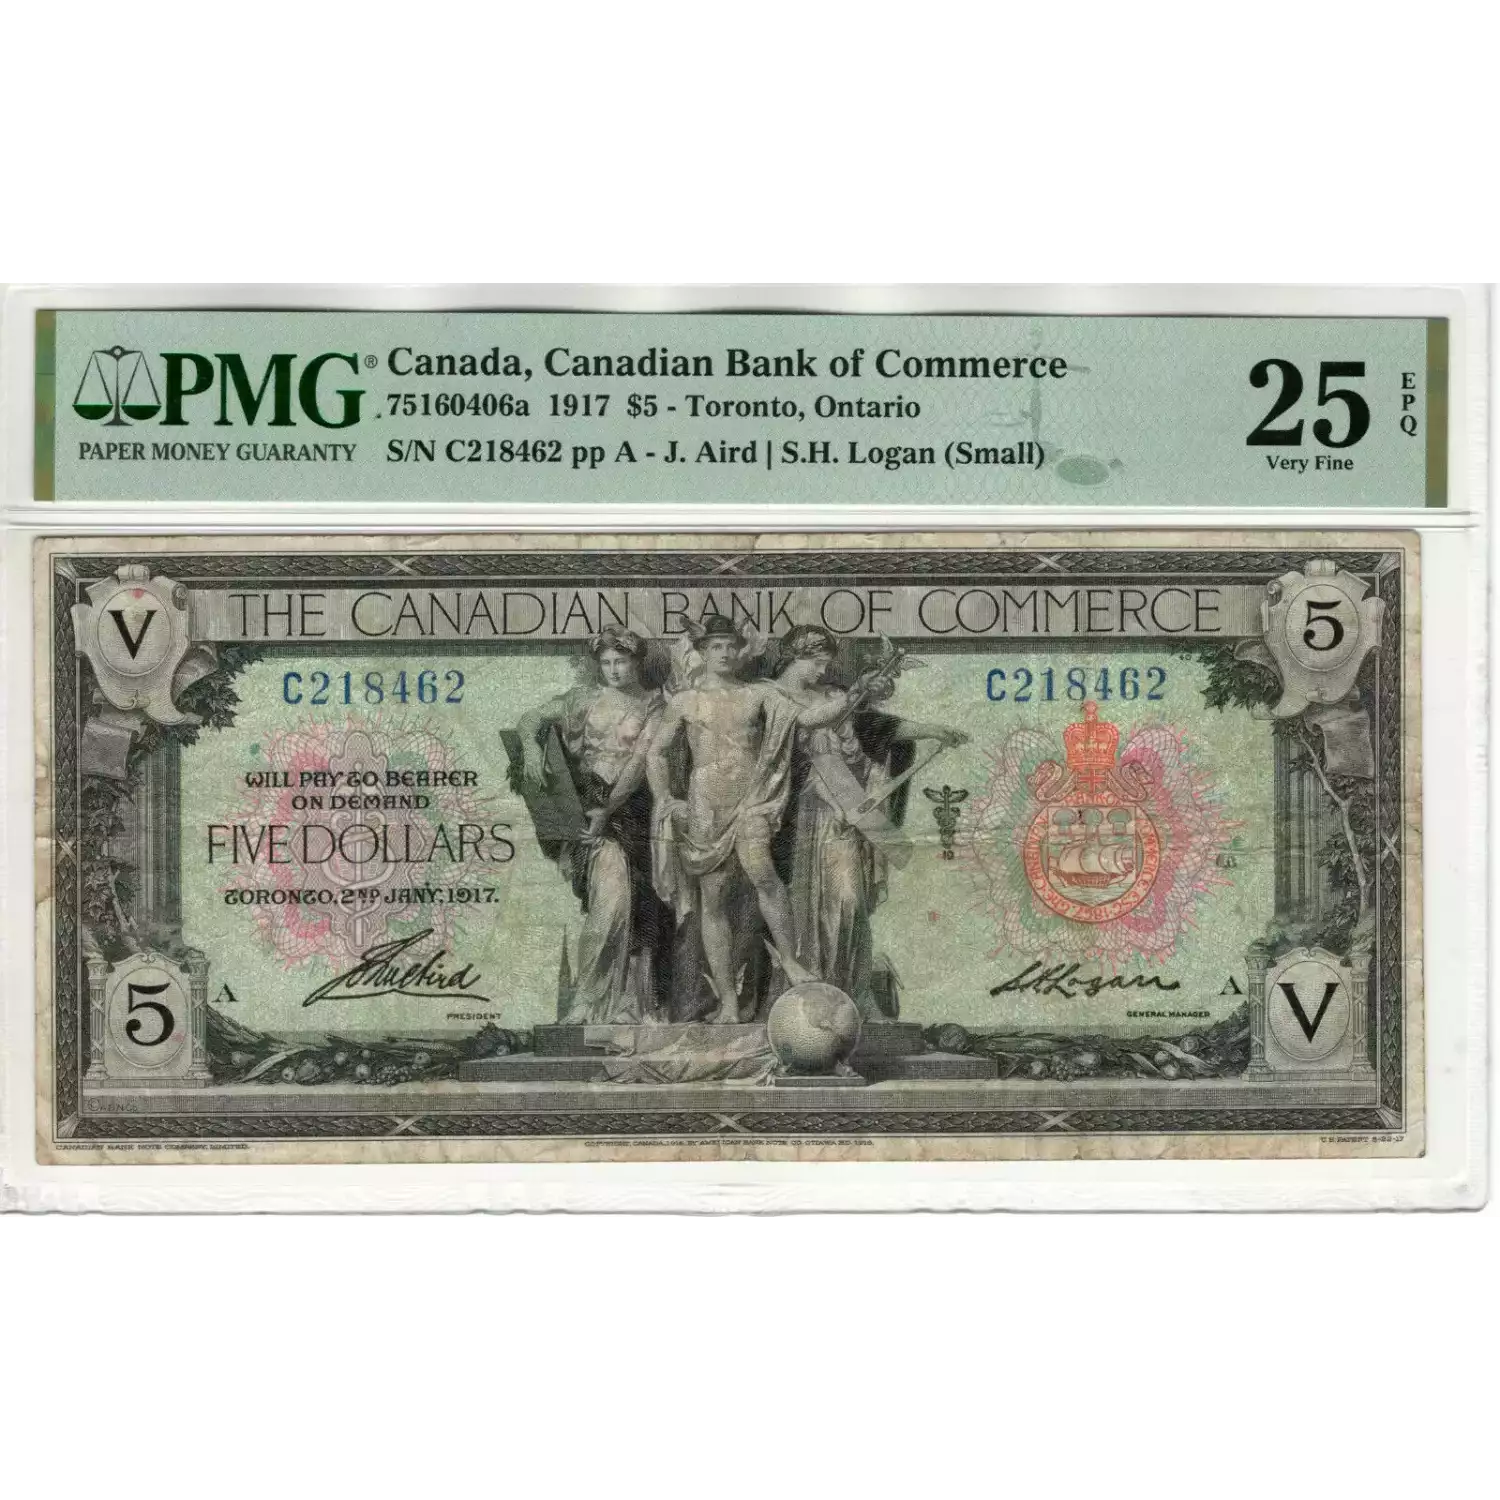 5 Dollars 26.5.1924, 1924-1925 Regular Issue a. Issued note Dominion of Canada 35